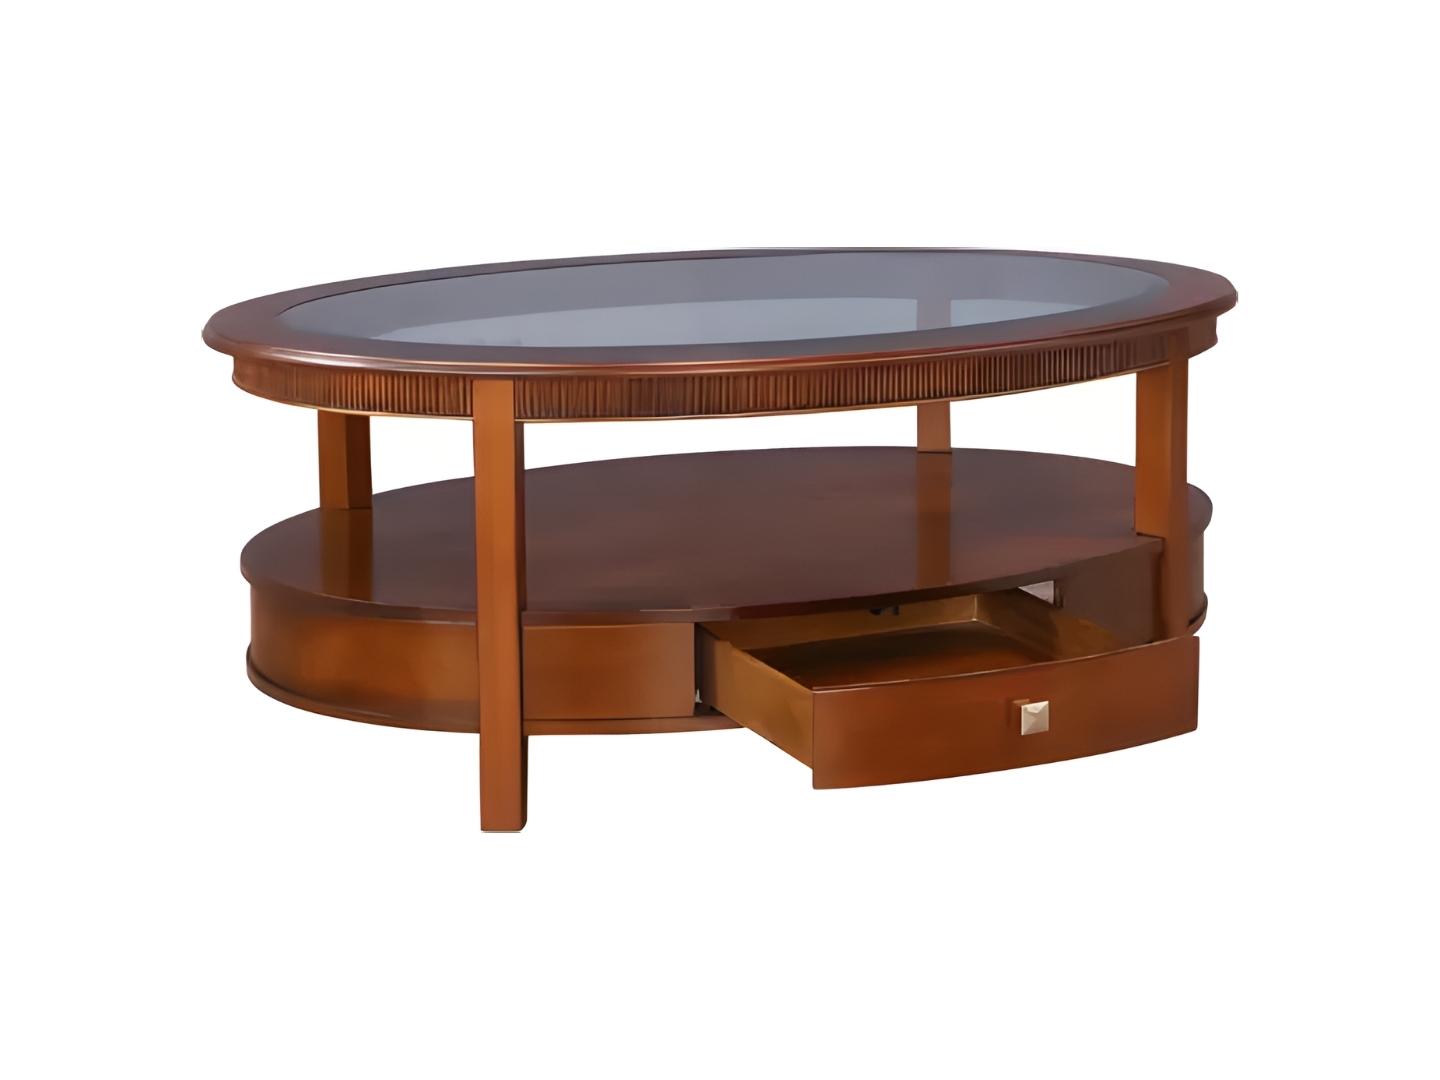 classic oval coffee table with glass and drawer - Lux Furniture